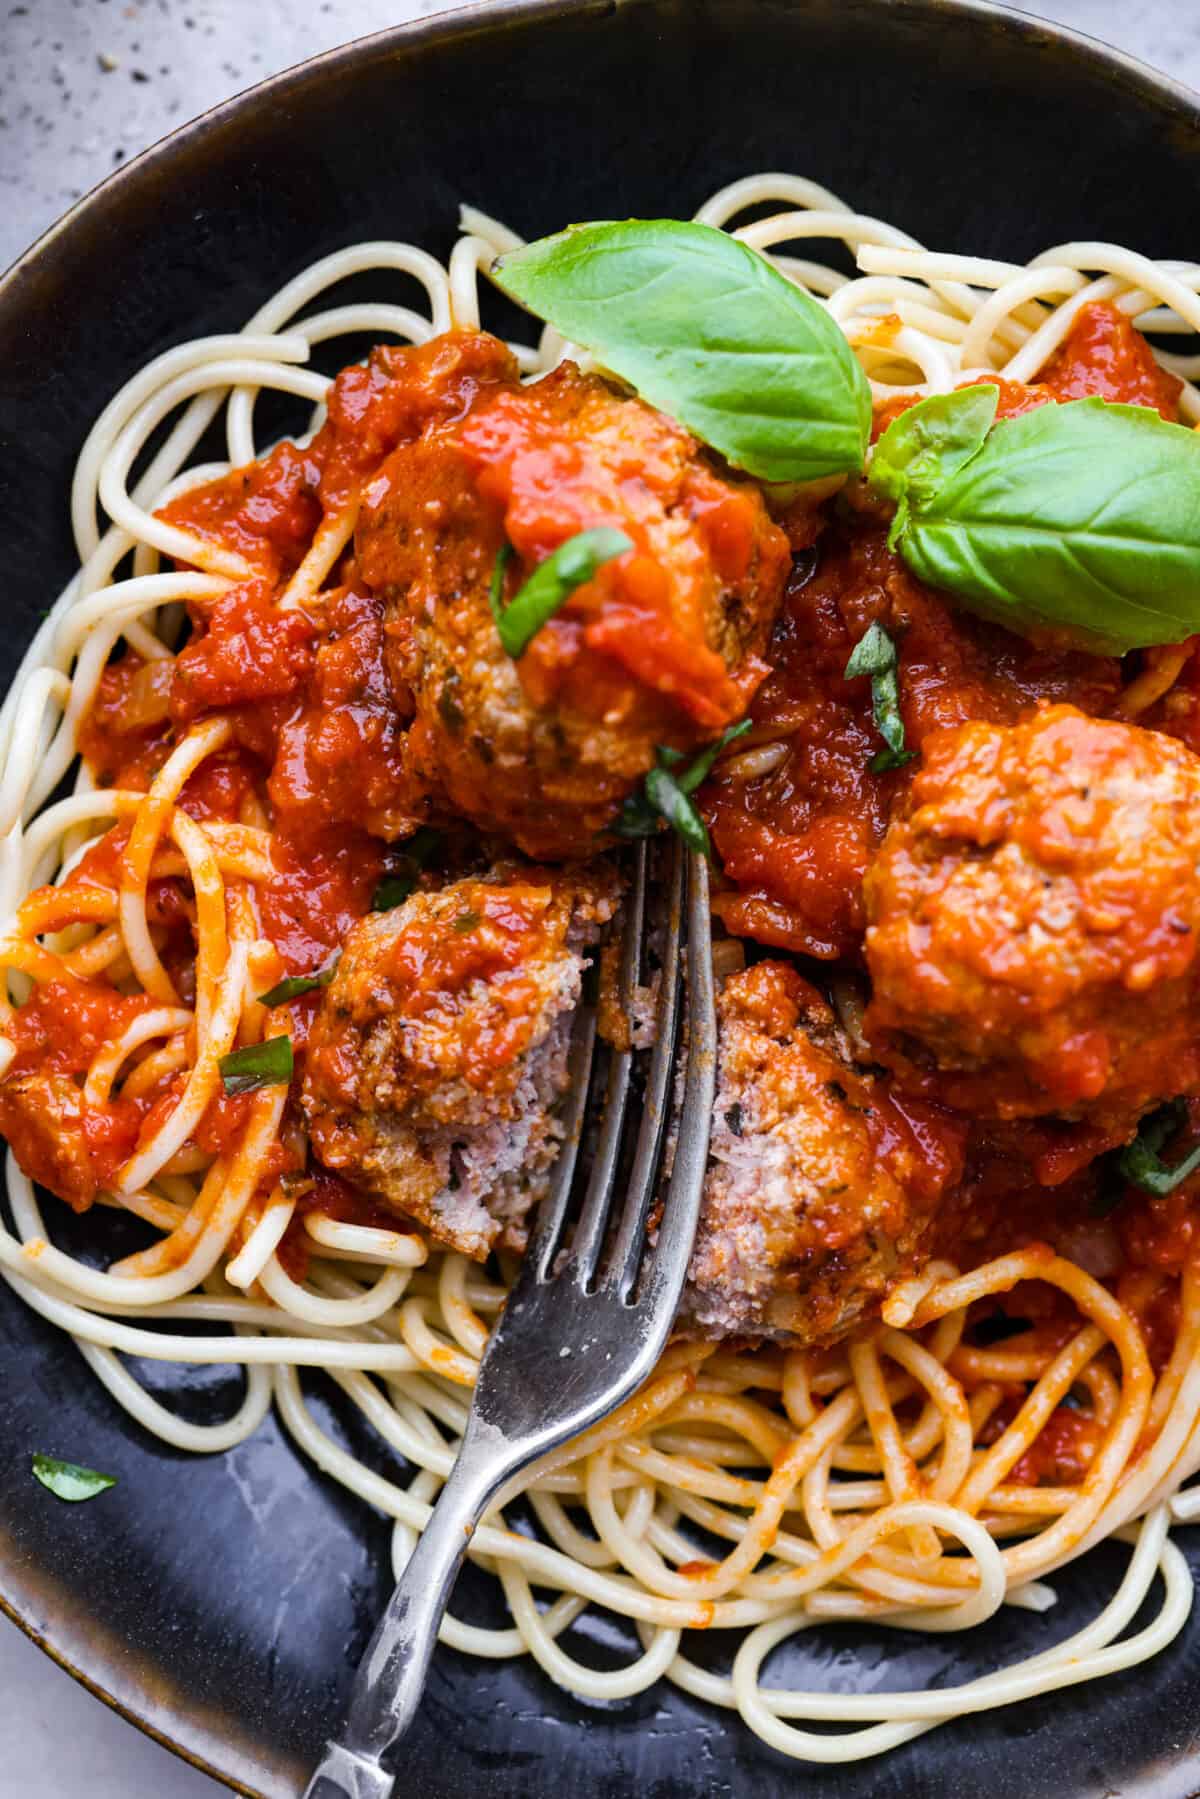 Close view of a fork cutting into a meatball with marinara and noodles.